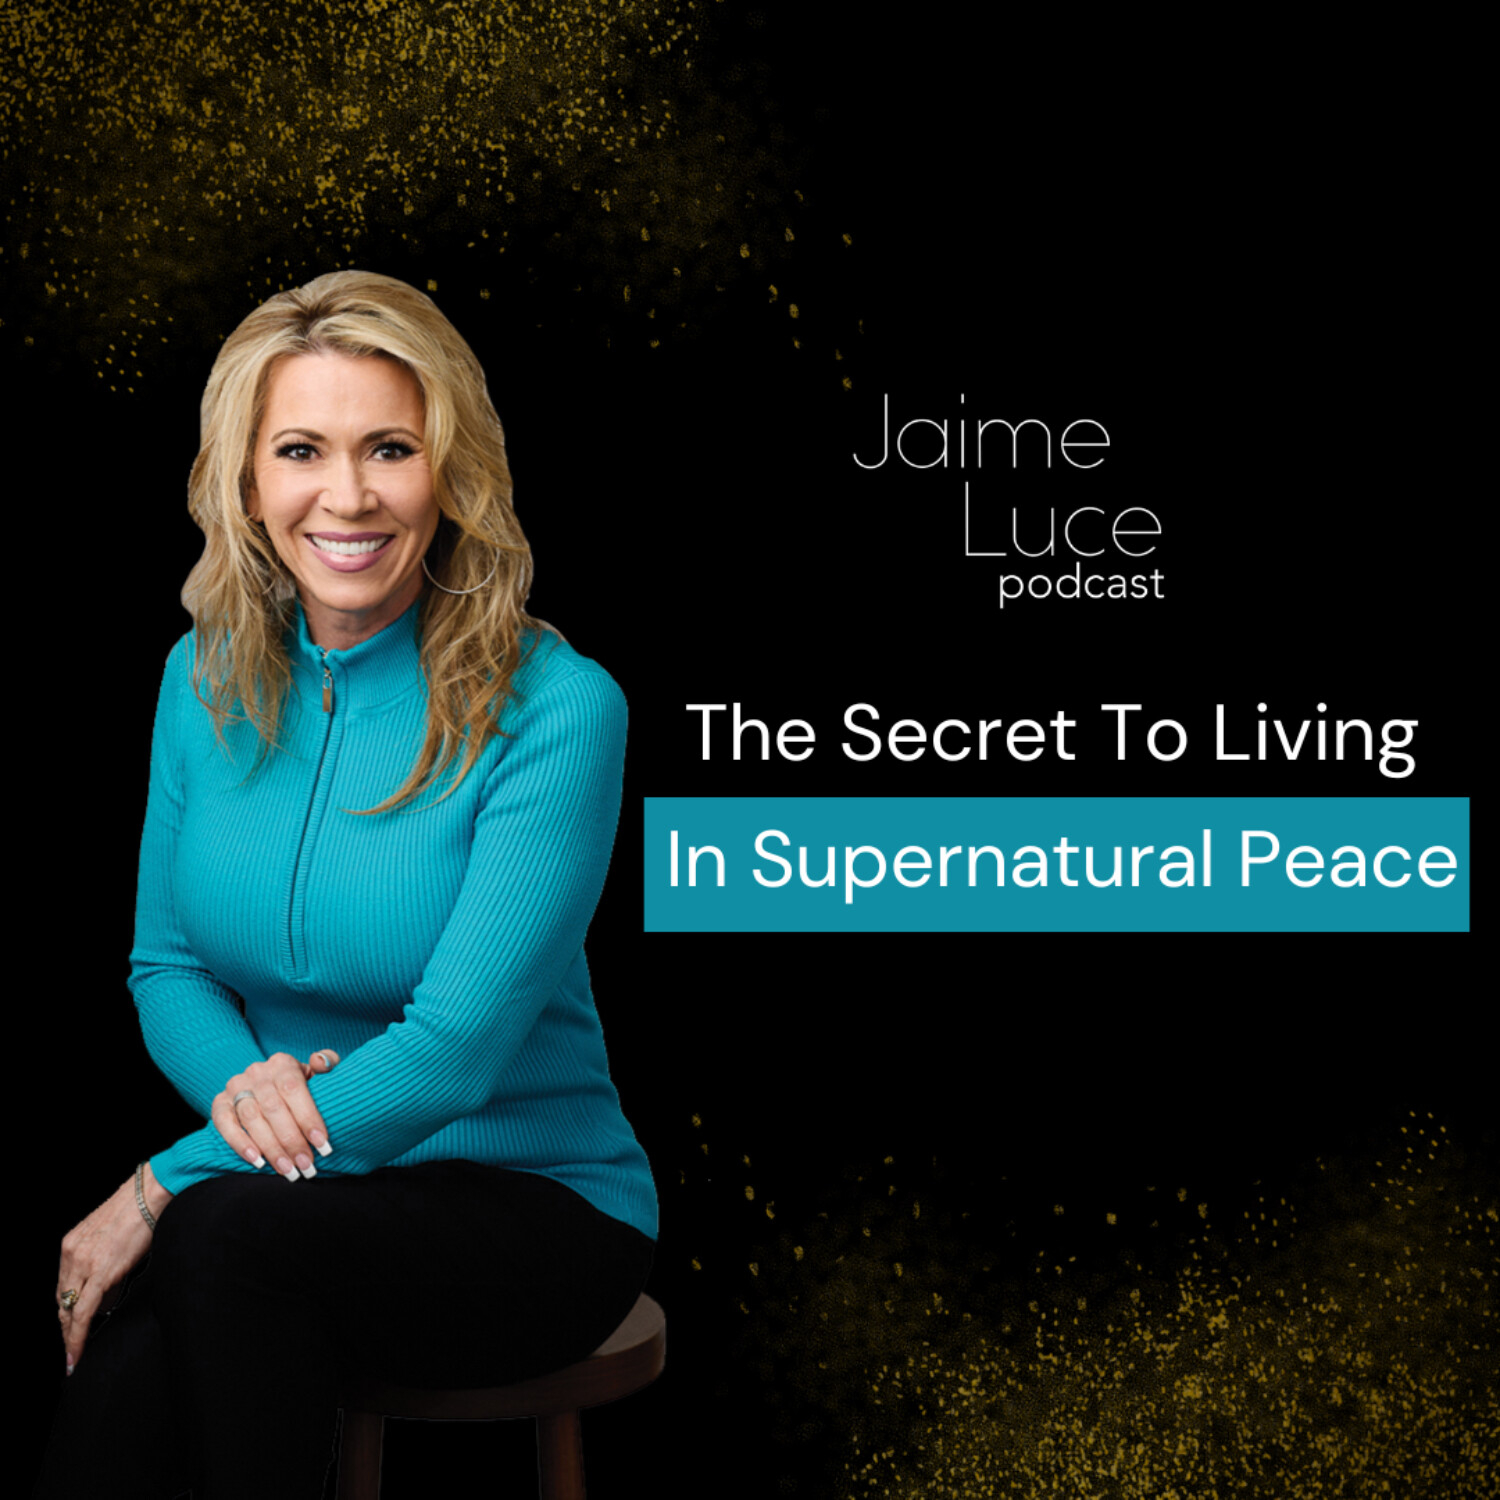 The Secret To Living In Supernatural Peace